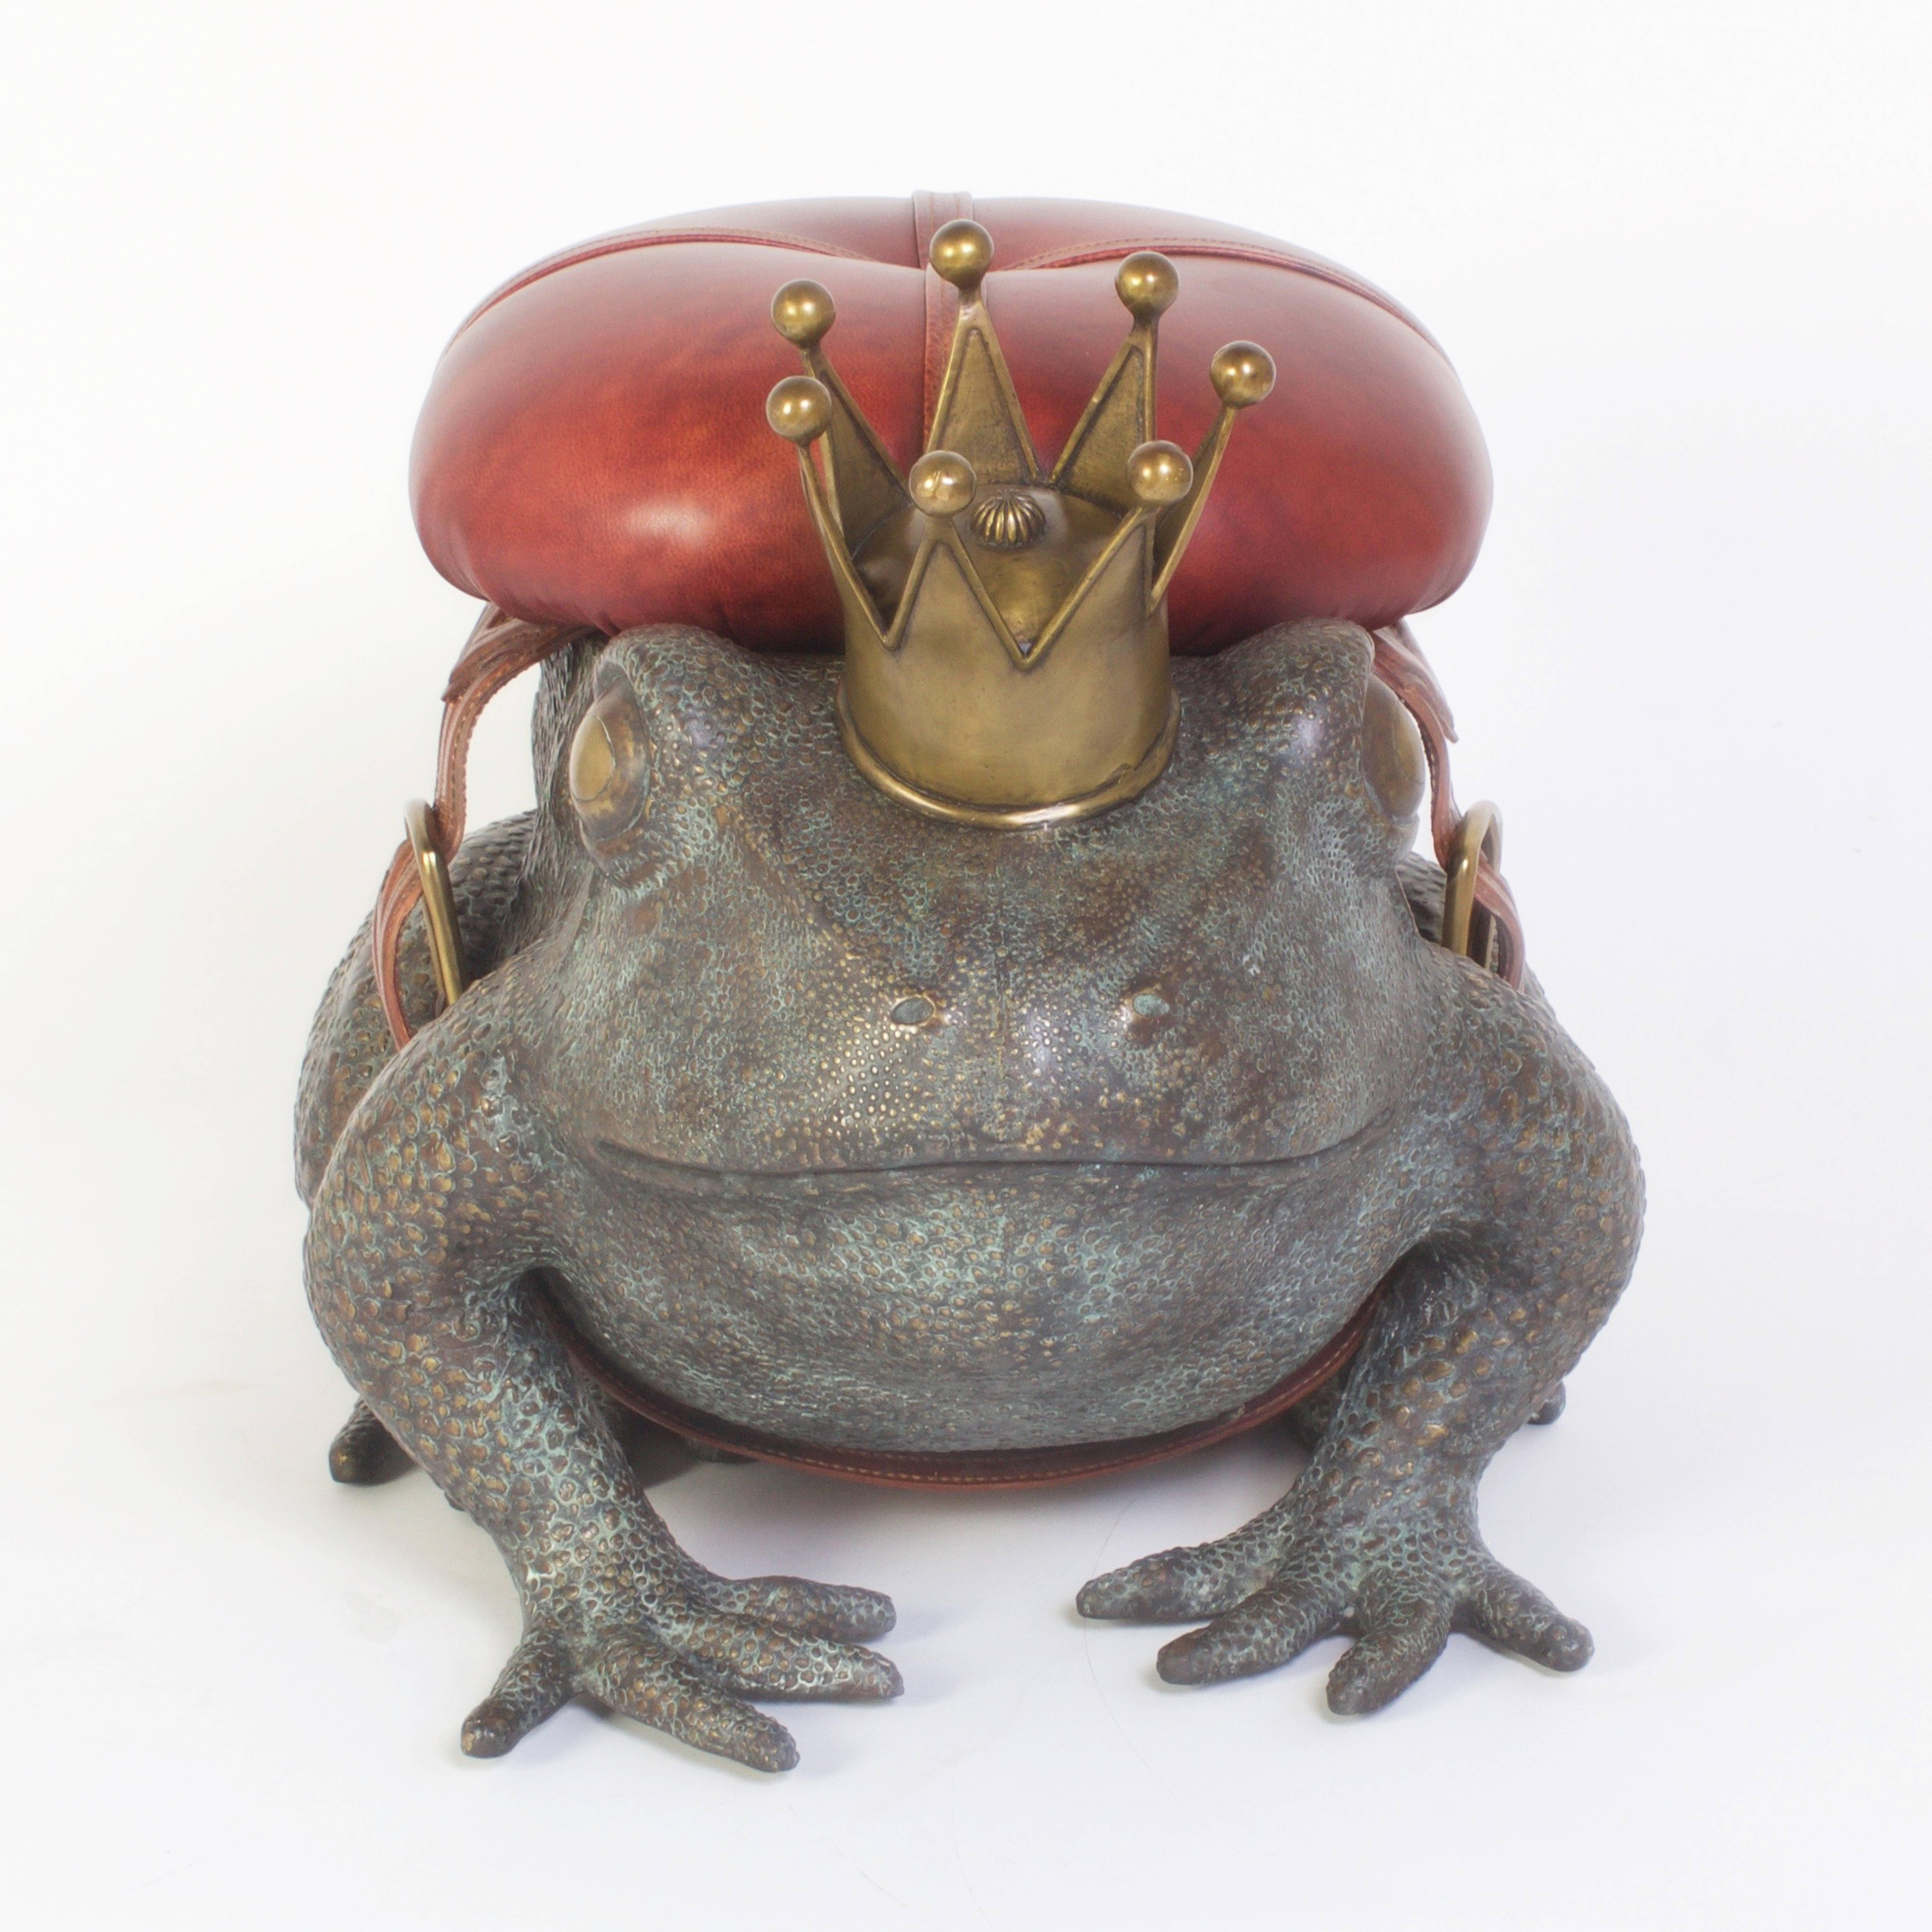 Here is a mid century bench or stool like something from a fairy tale. This bronze frog prince is expertly cast and has a proper patina. Featuring an ox blood leather seat cushion strapped on with a brown, tooled leather belt. Perhaps Maitland